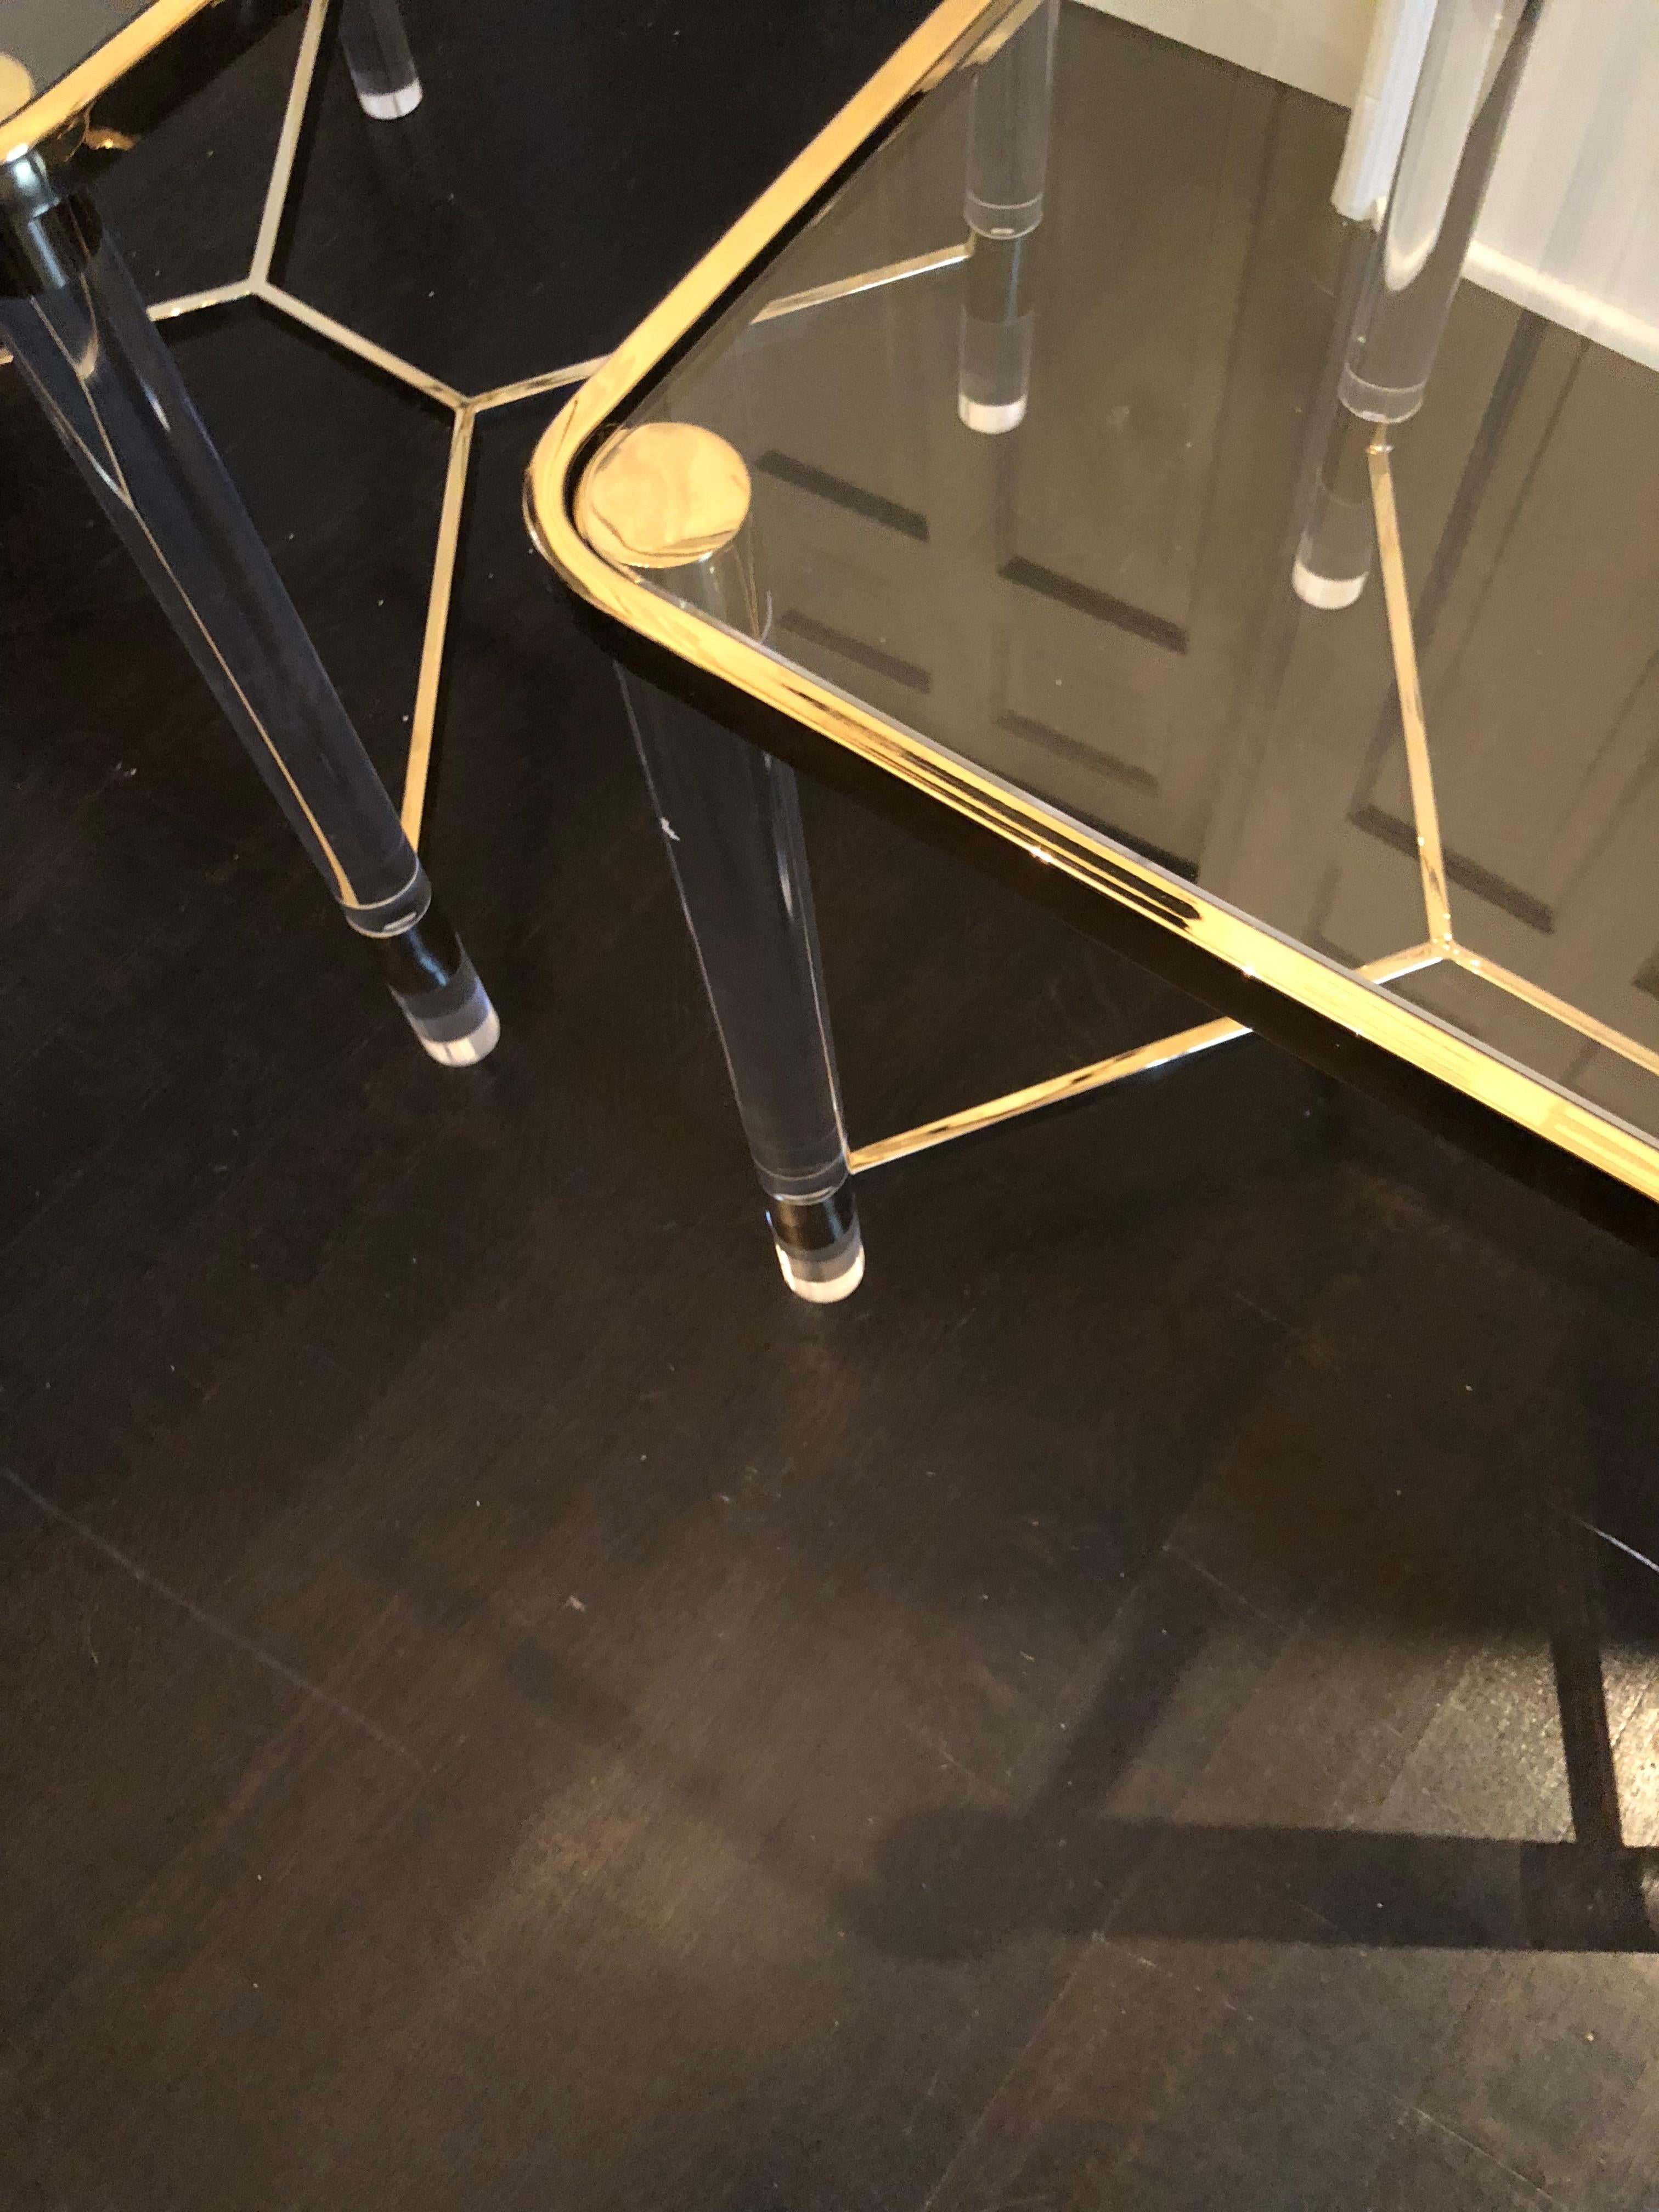 Stunning pair of Lucite and brass end tables with glass tops. Each table has thick Lucite legs capped in brass with a brass stretcher at the base. Tables are versatile and would work in several decors. Unsigned.